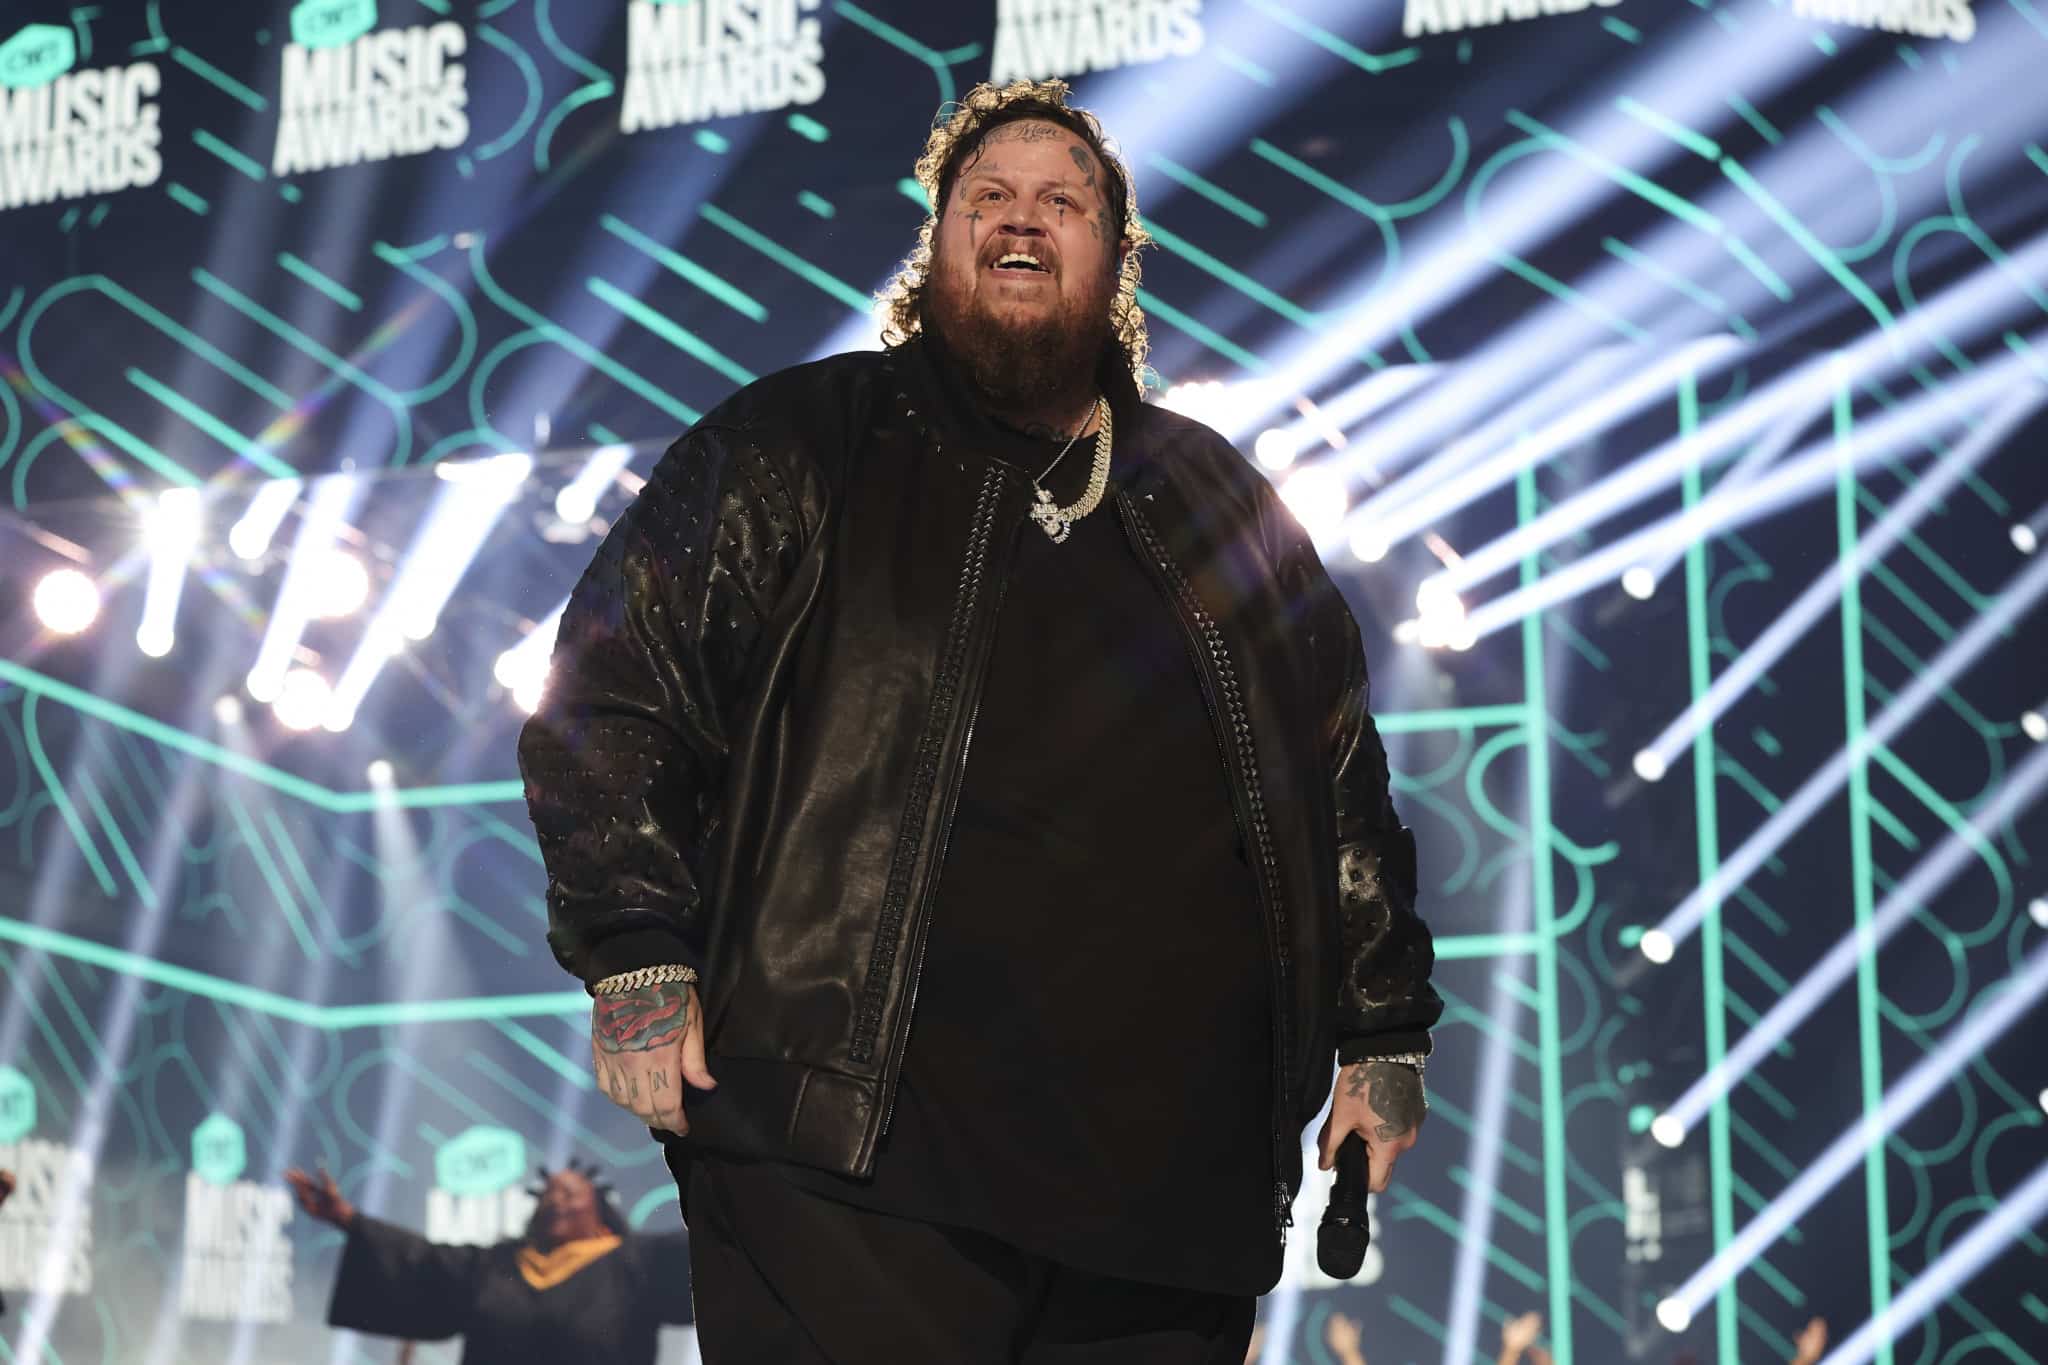 Jelly Roll performs onstage at the 2023 CMT Music Awards held at Moody Center on April 2, 2023 in Austin, Texas. (Photo by Christopher Polk/Variety via Getty Images)